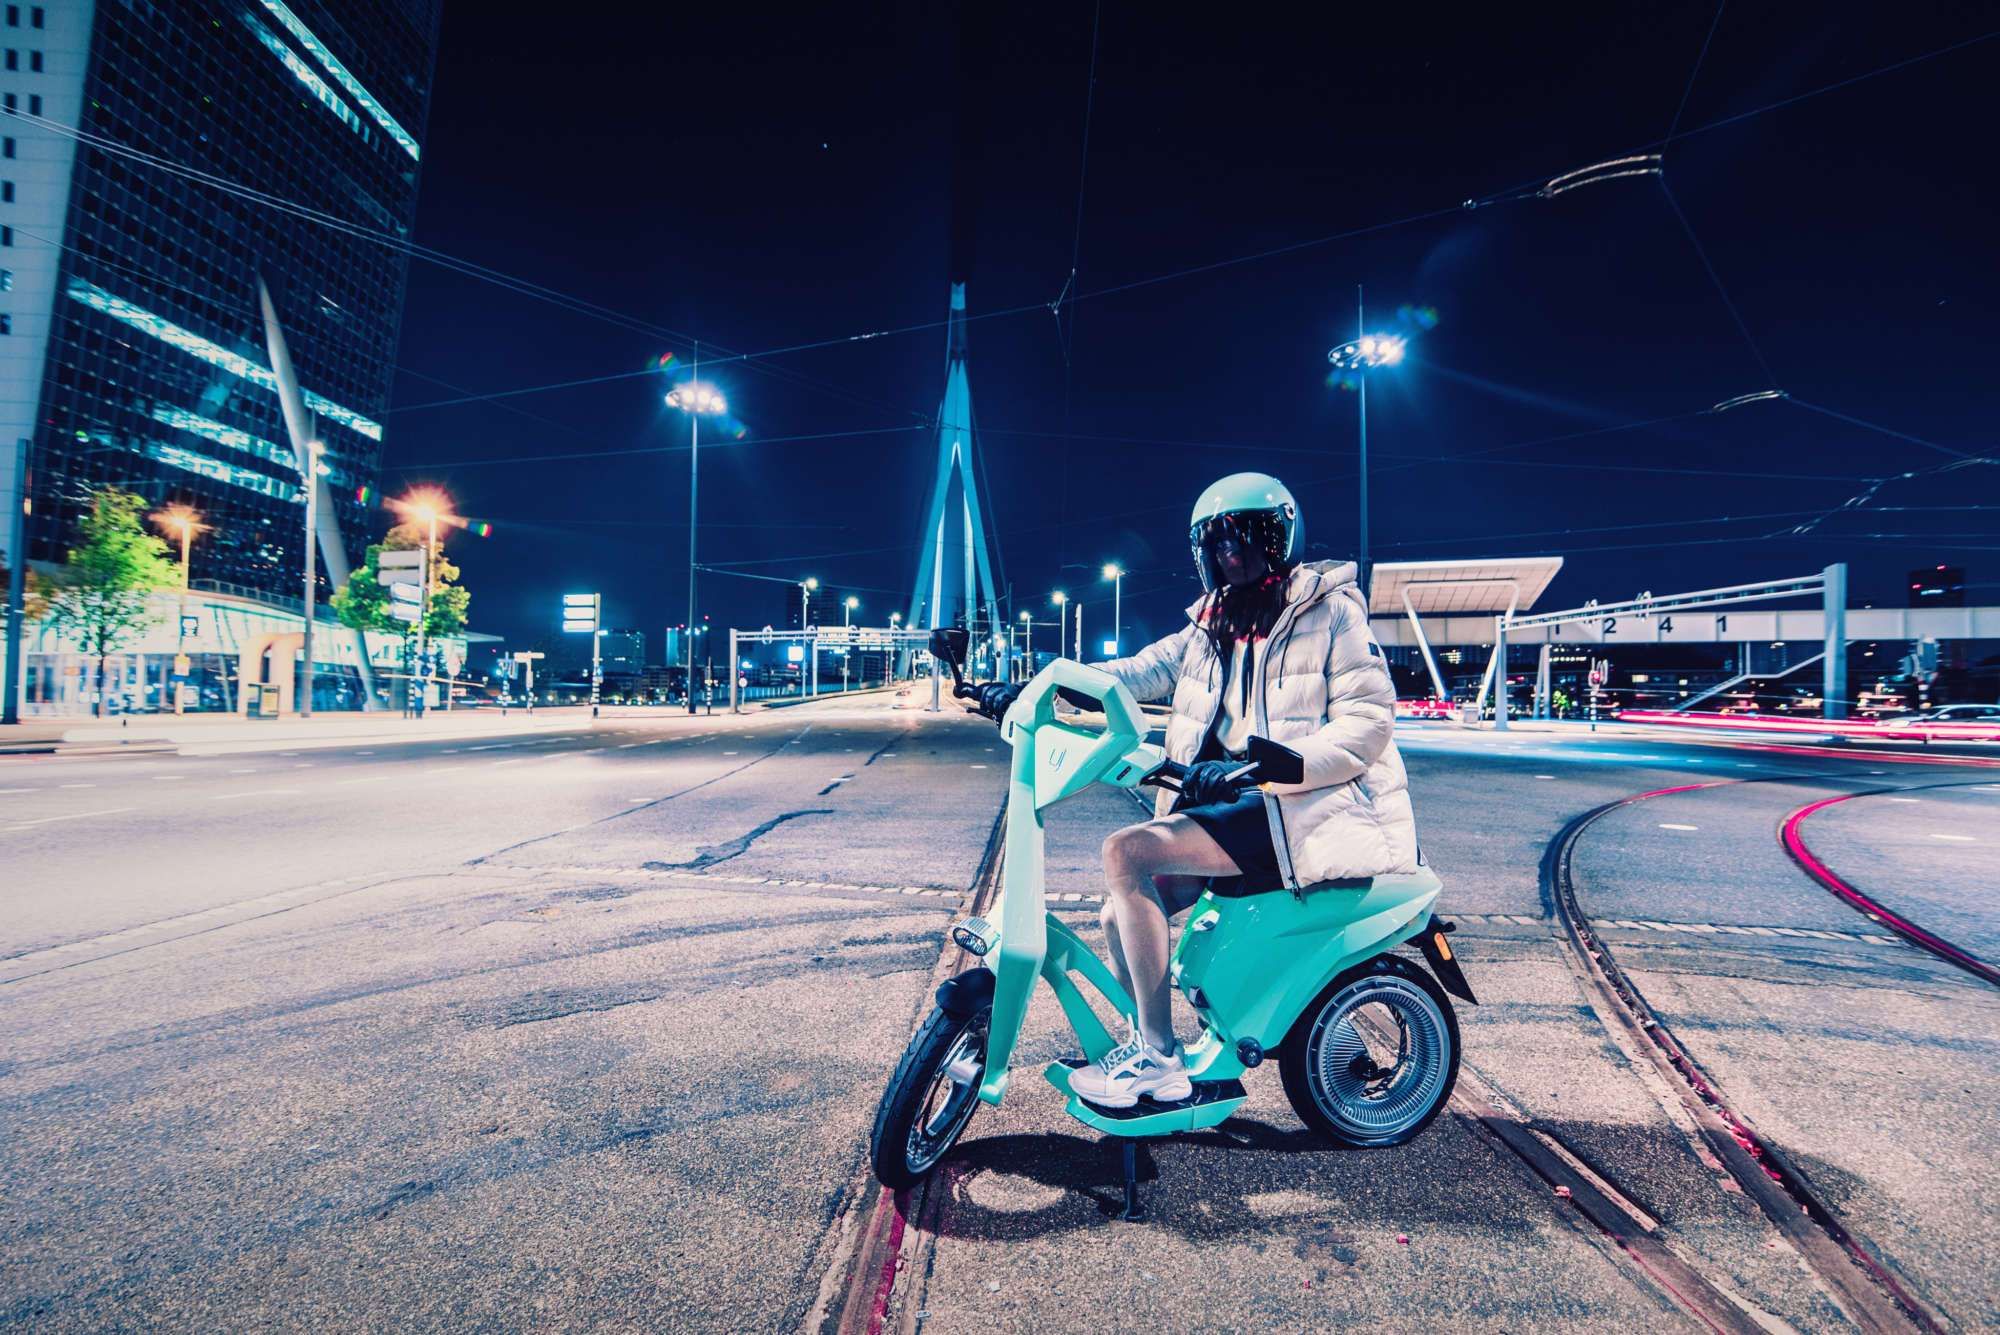 Woman with winter jacket and motorcycle helmet sits on a turquoise UJET scooter, the surroundings have a big city character, it is dark/night.